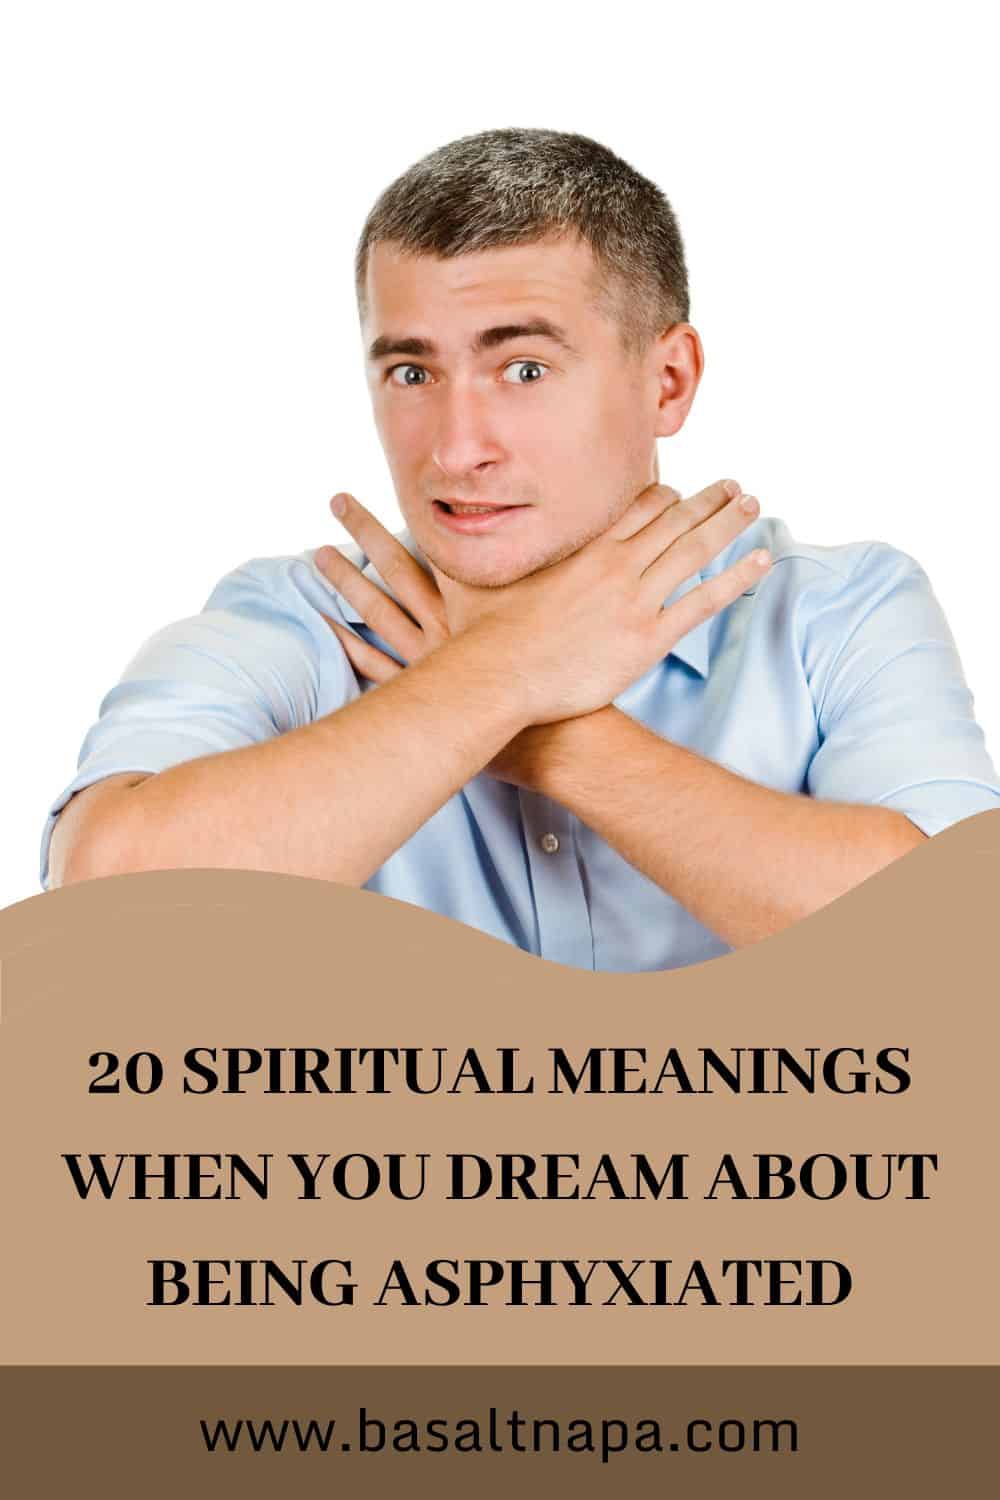 20 Spiritual Meanings When You Dream About Being Asphyxiated